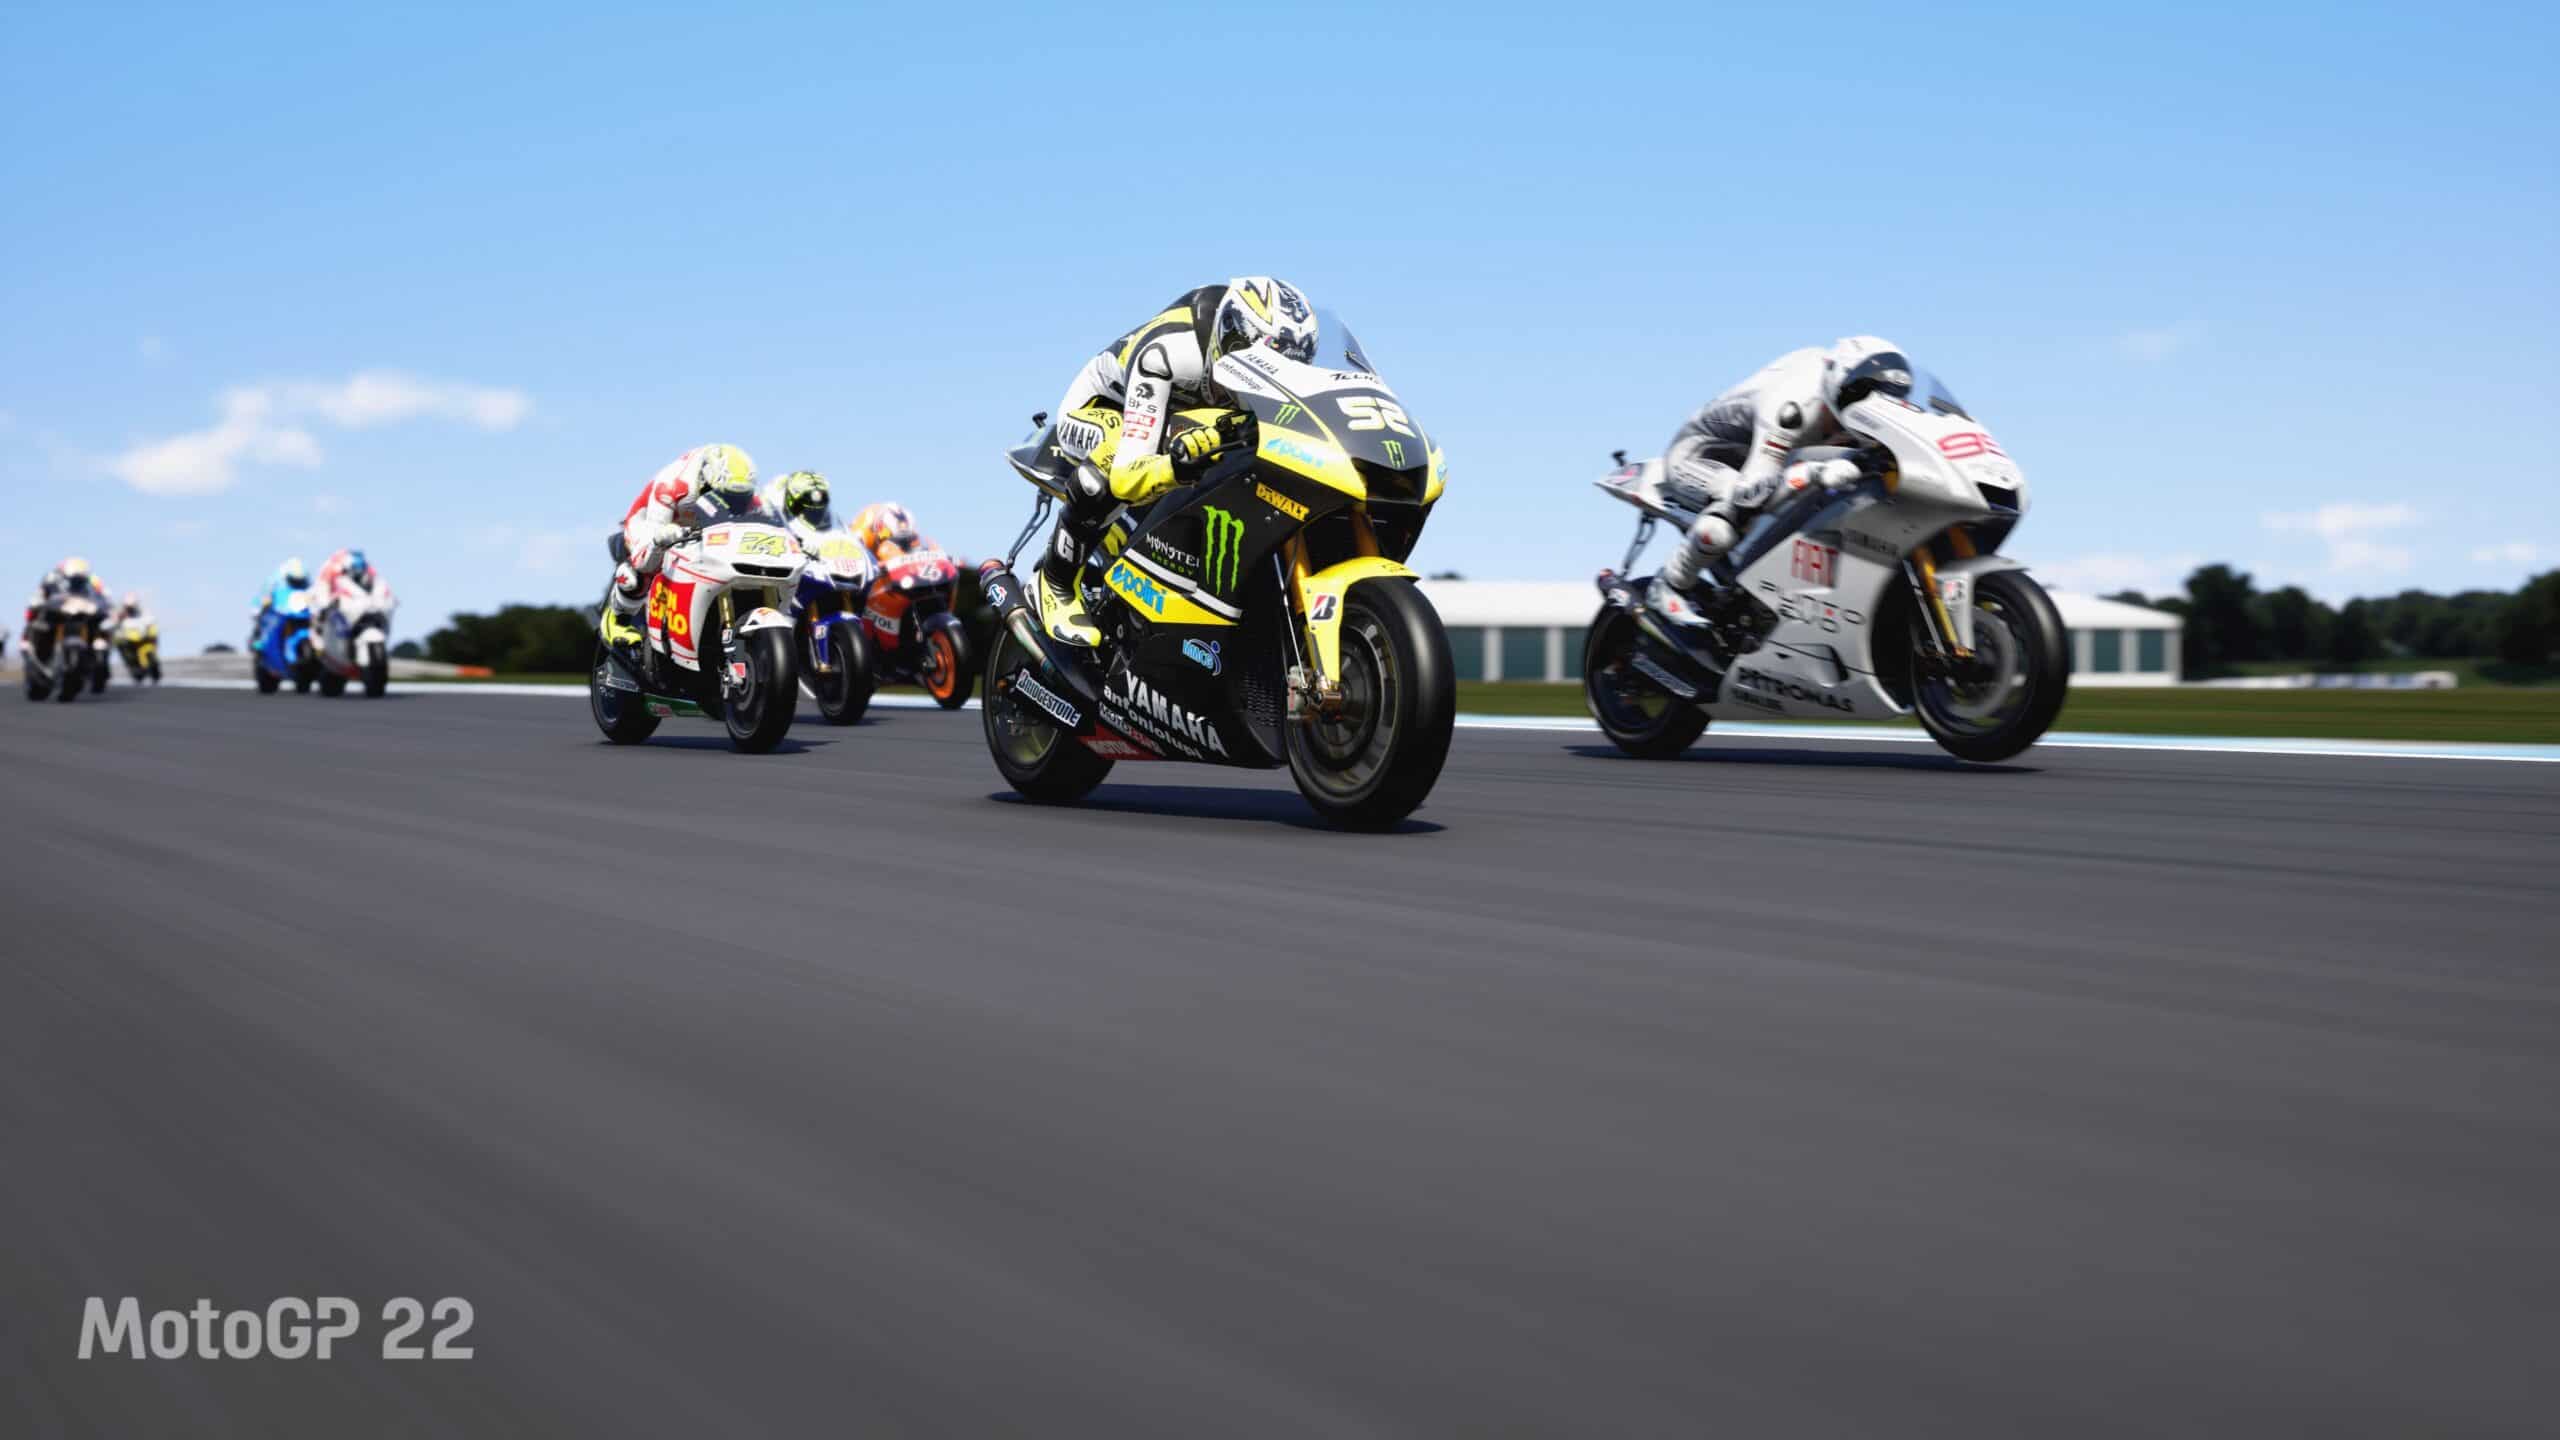 MotoGP 22 game news, reviews, guides and updates Traxion